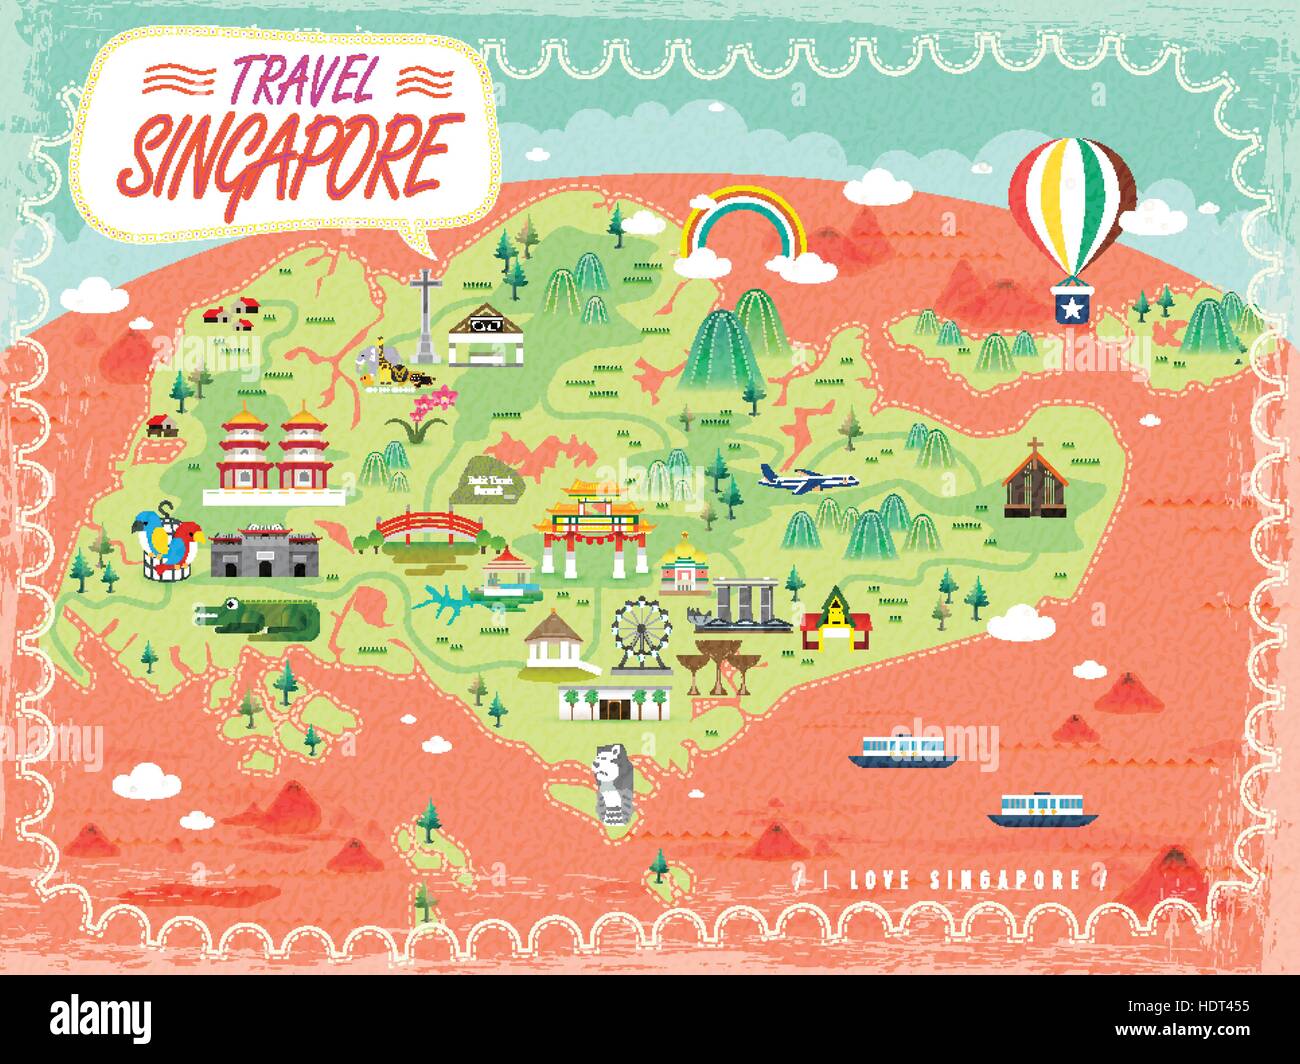 singapore travel map with lovely attractions in flat design HDT455